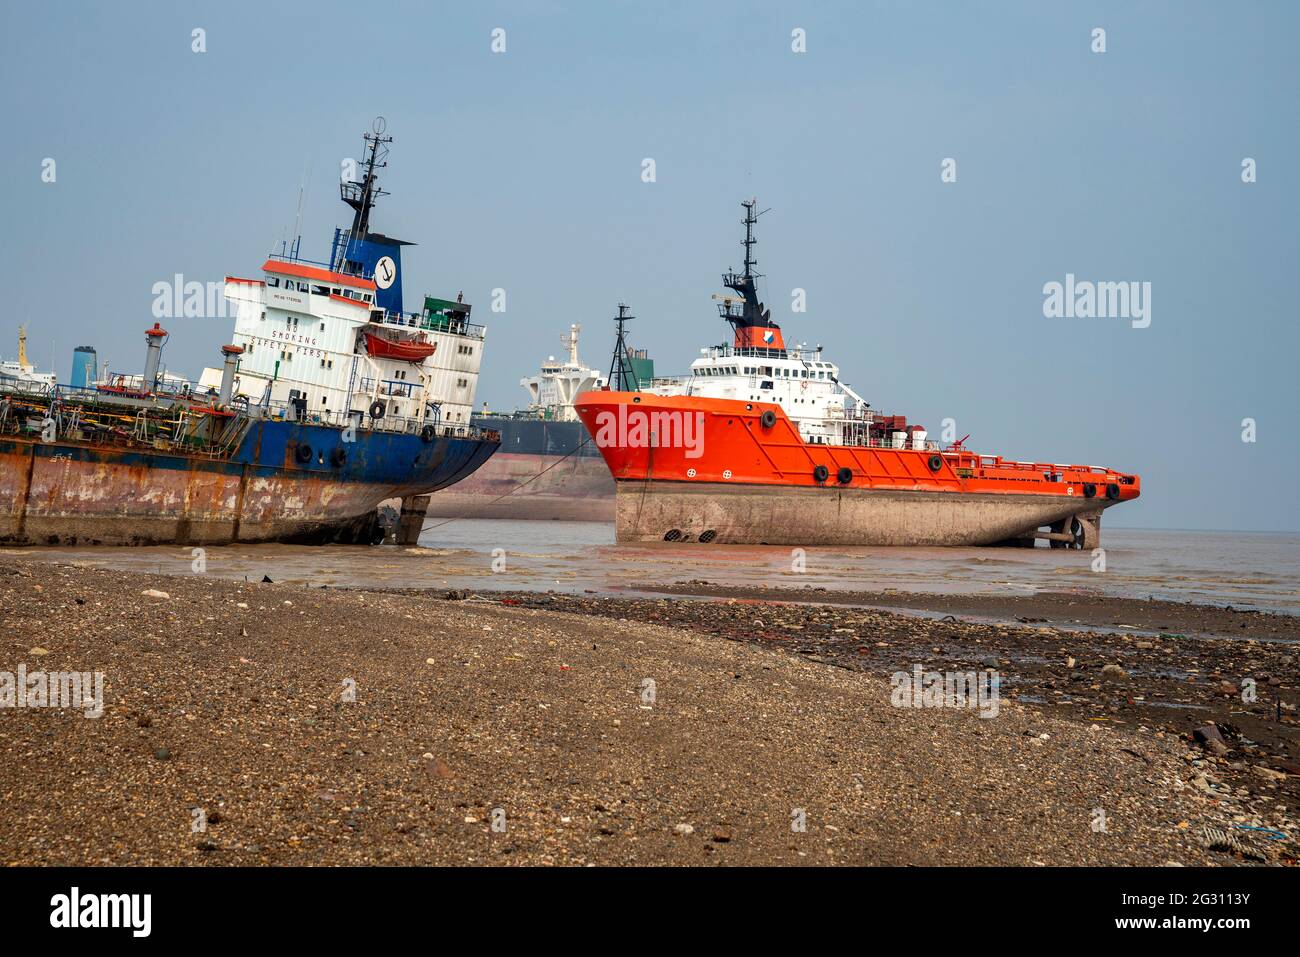 Alang ,01, February,2016: Close up view of different types of boats  anchored at Alang Ship Breaking Yard for scrapping,Bhavnagar, Gujarat,India Stock Photo